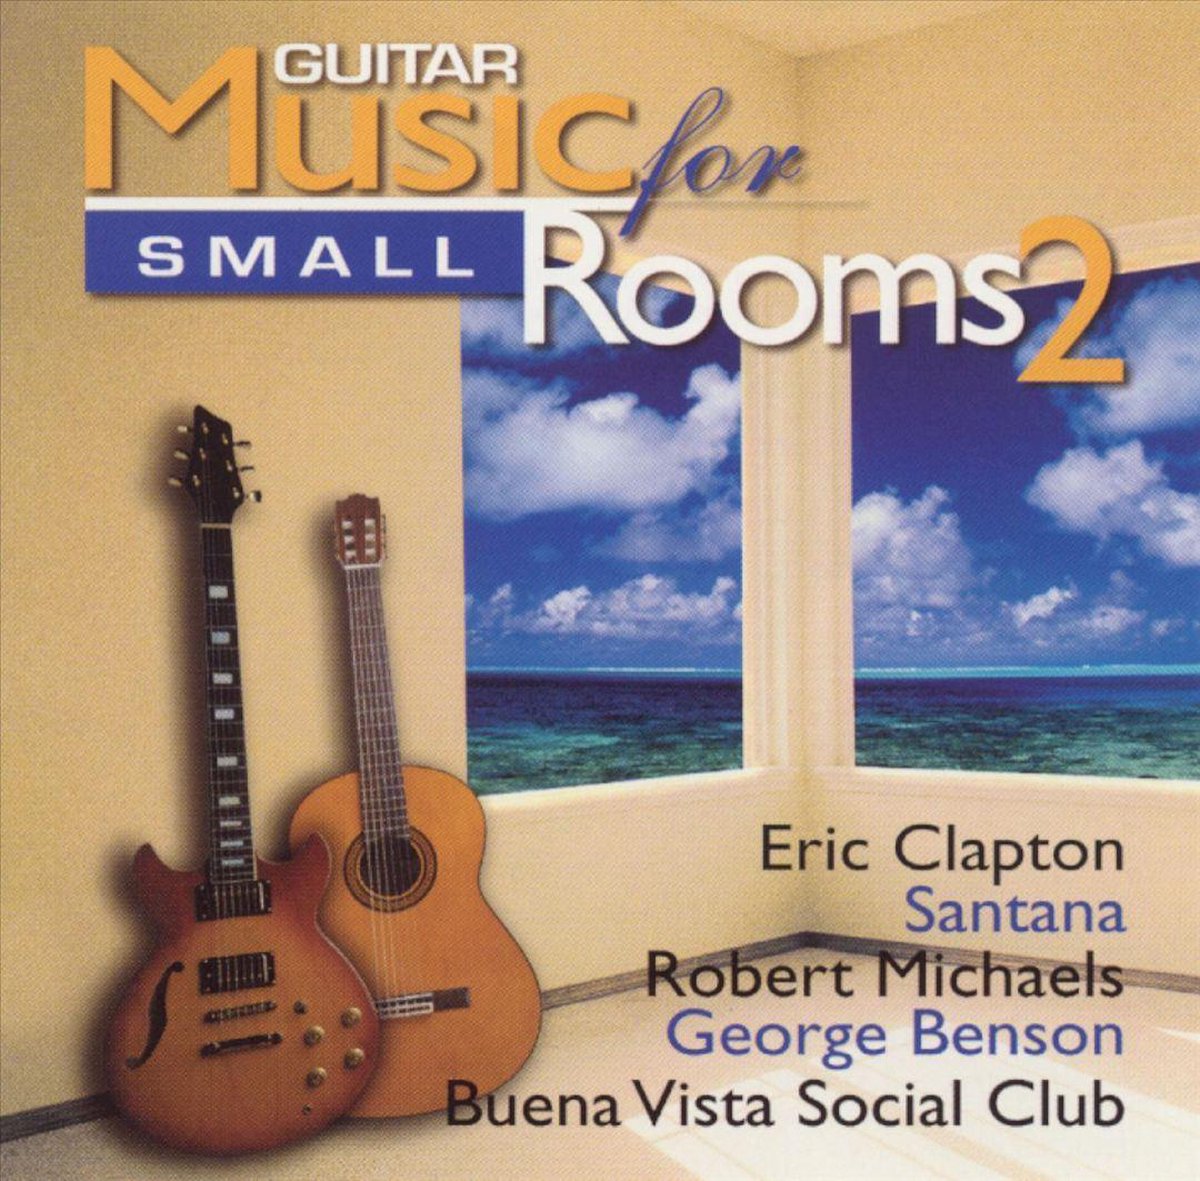 Guitar Music For Small Rooms 2 - various artists